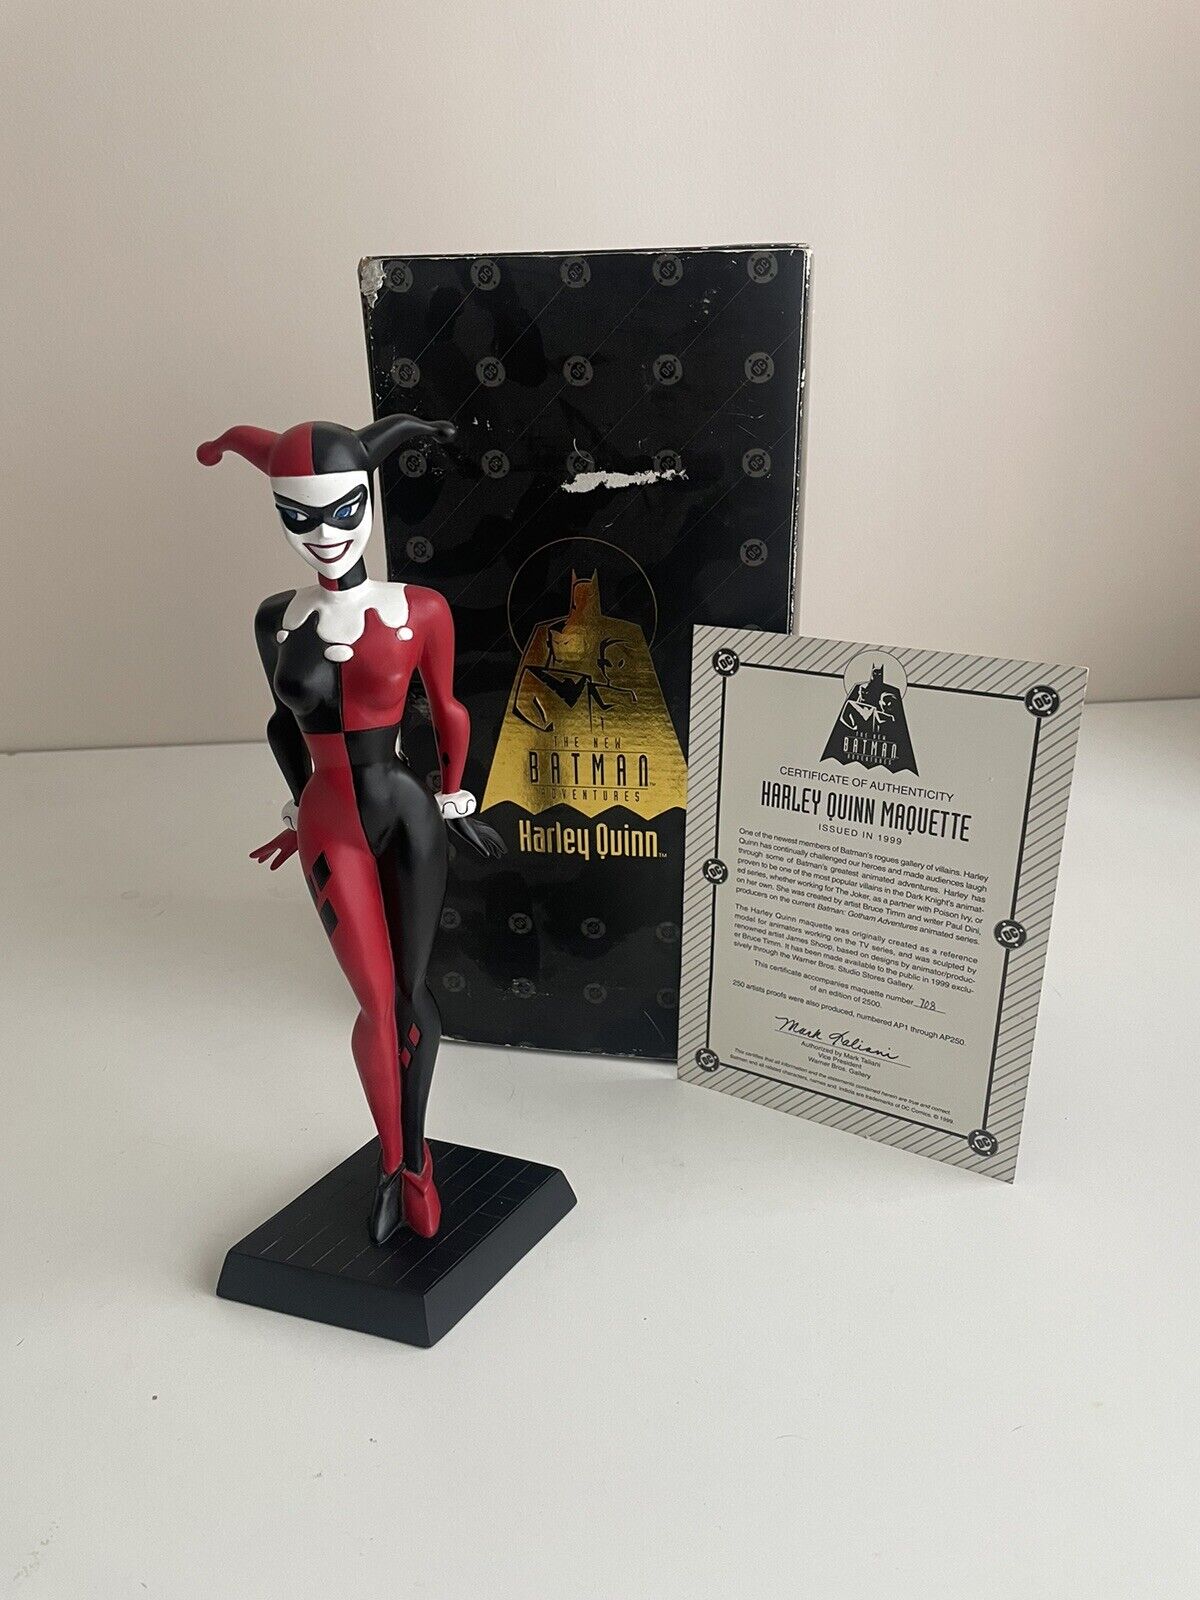 ORIGINAL WB STORE 1999 HARLEY QUINN ANIMATORS MAQUETTE STATUE *EXTREMELY RARE*